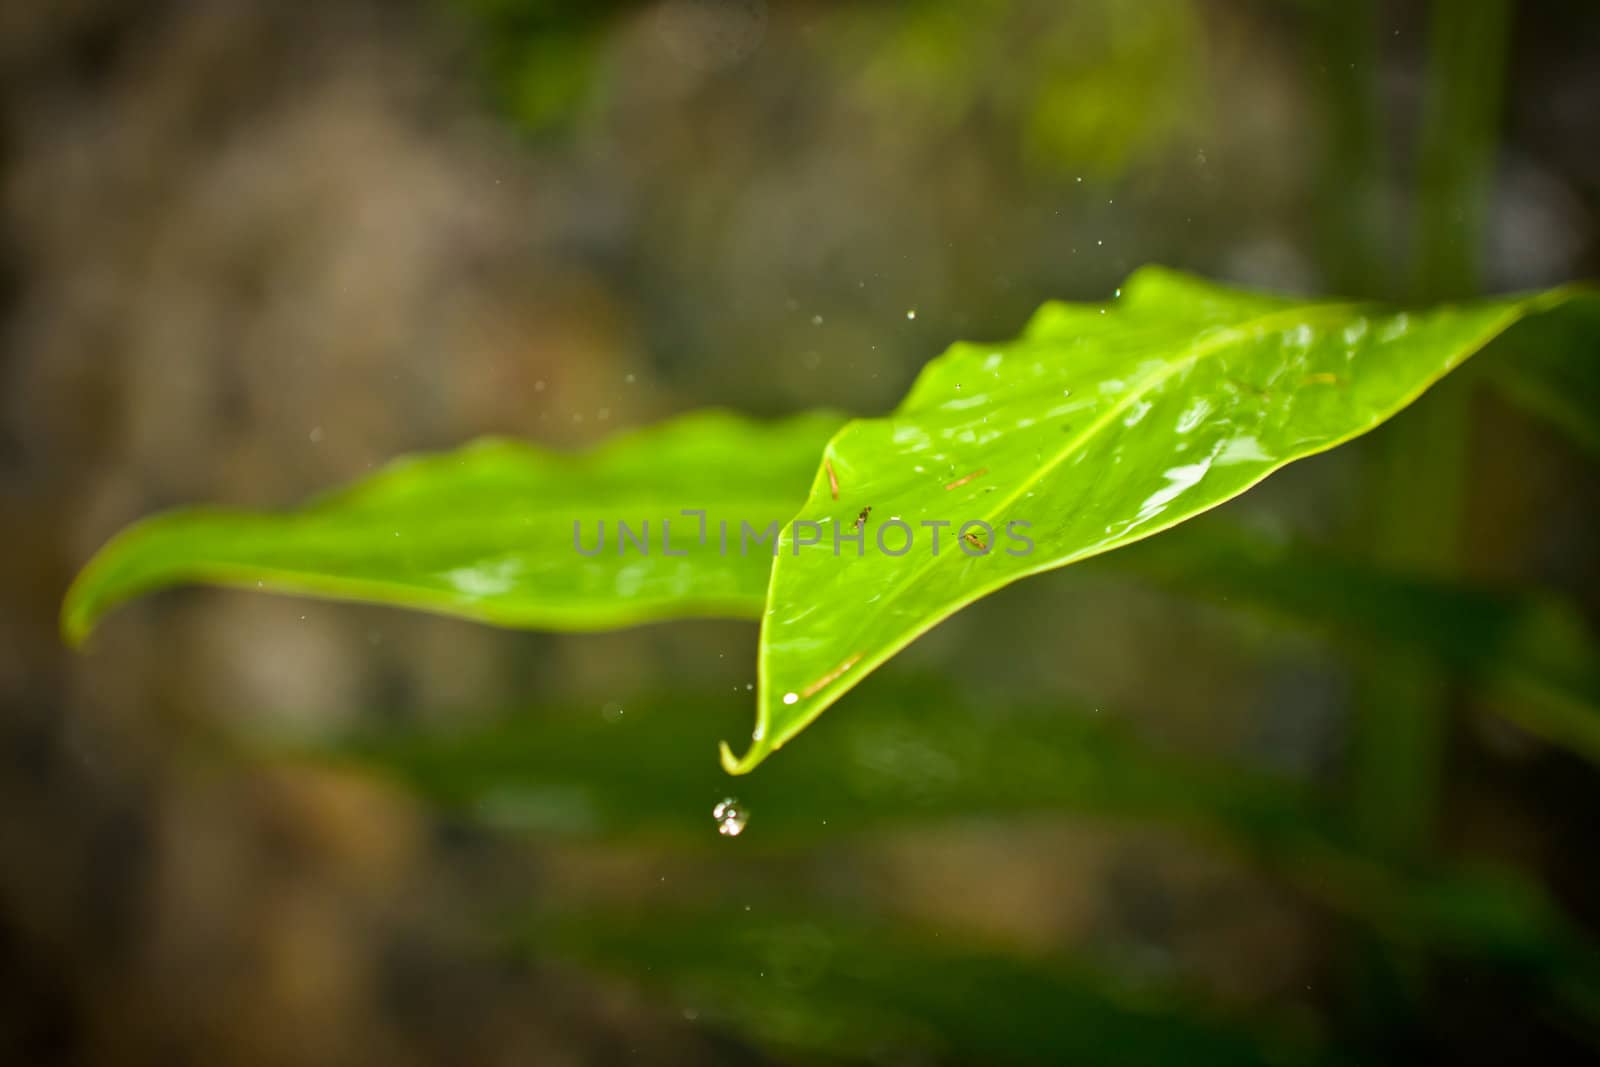 Perfect glistening rain drop frozen mid air as it falls from the tip of a wet green leaf with shallow dof